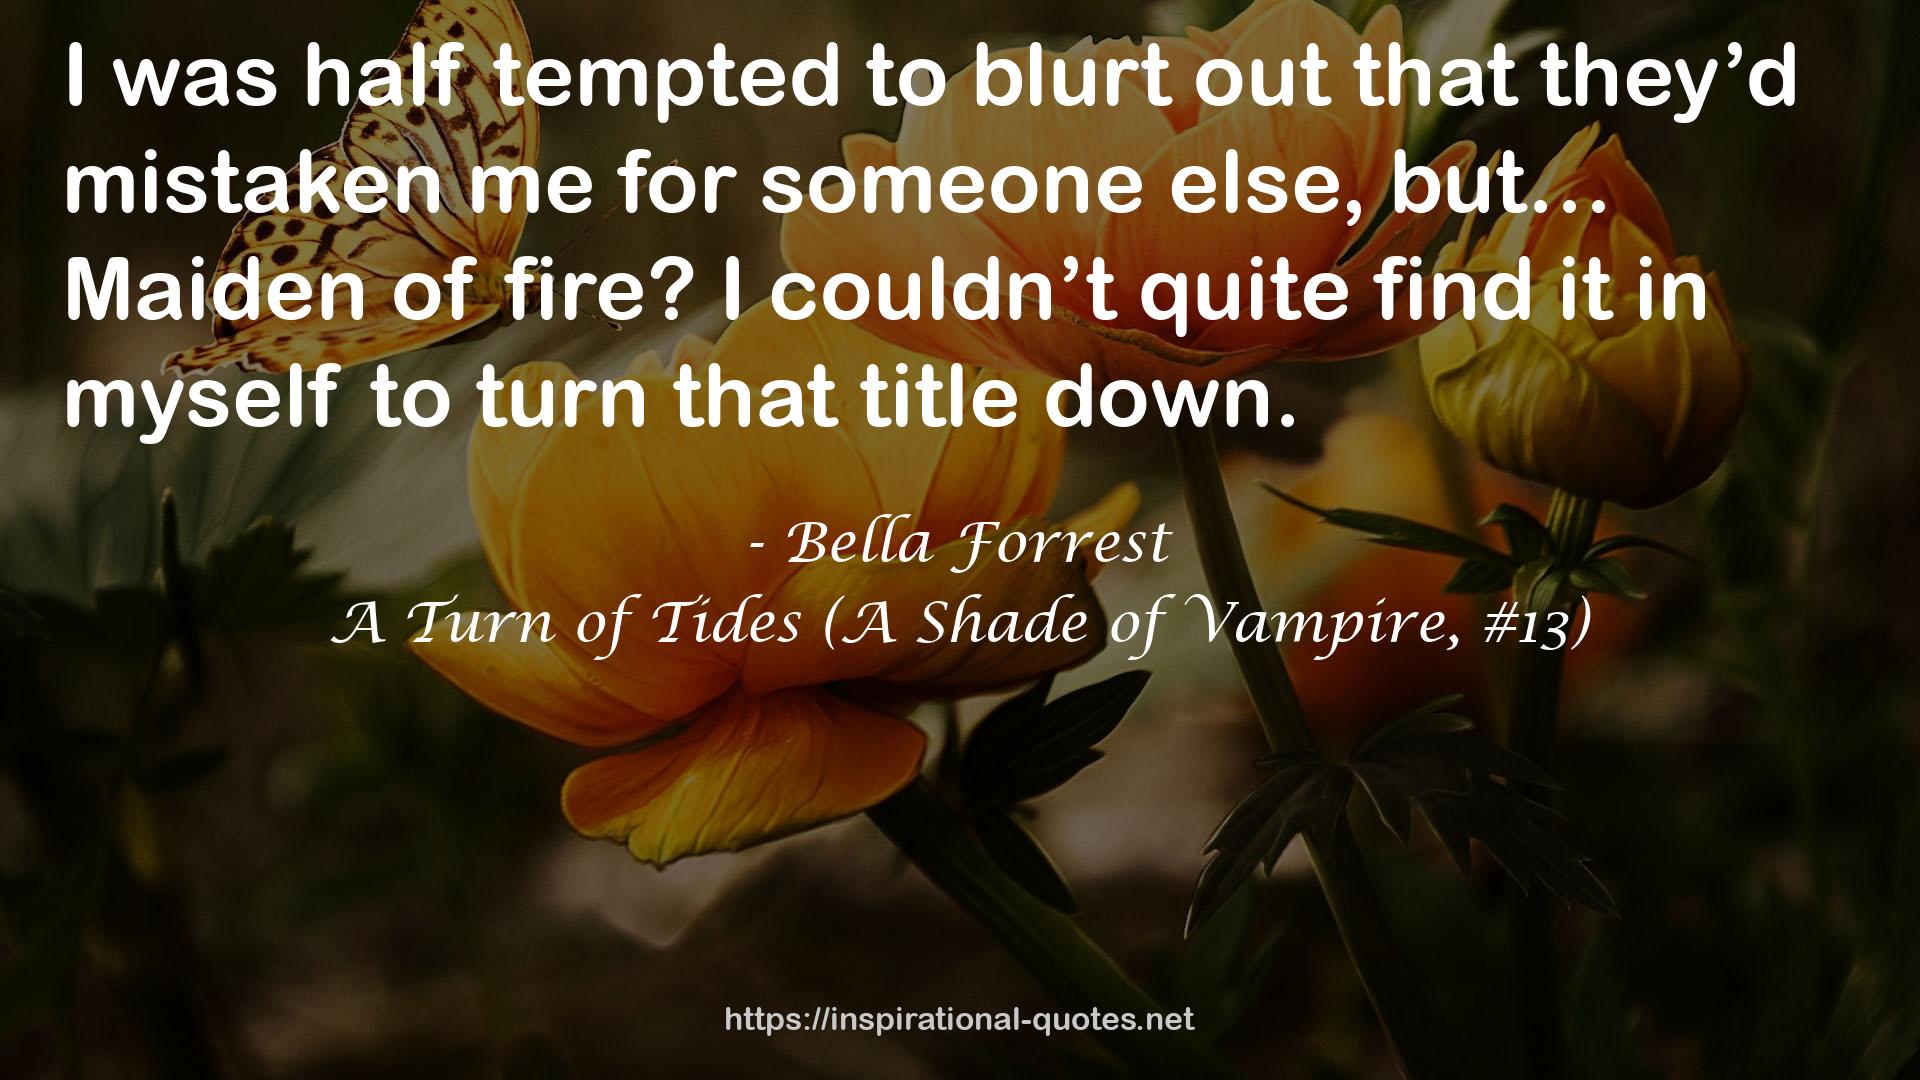 A Turn of Tides (A Shade of Vampire, #13) QUOTES